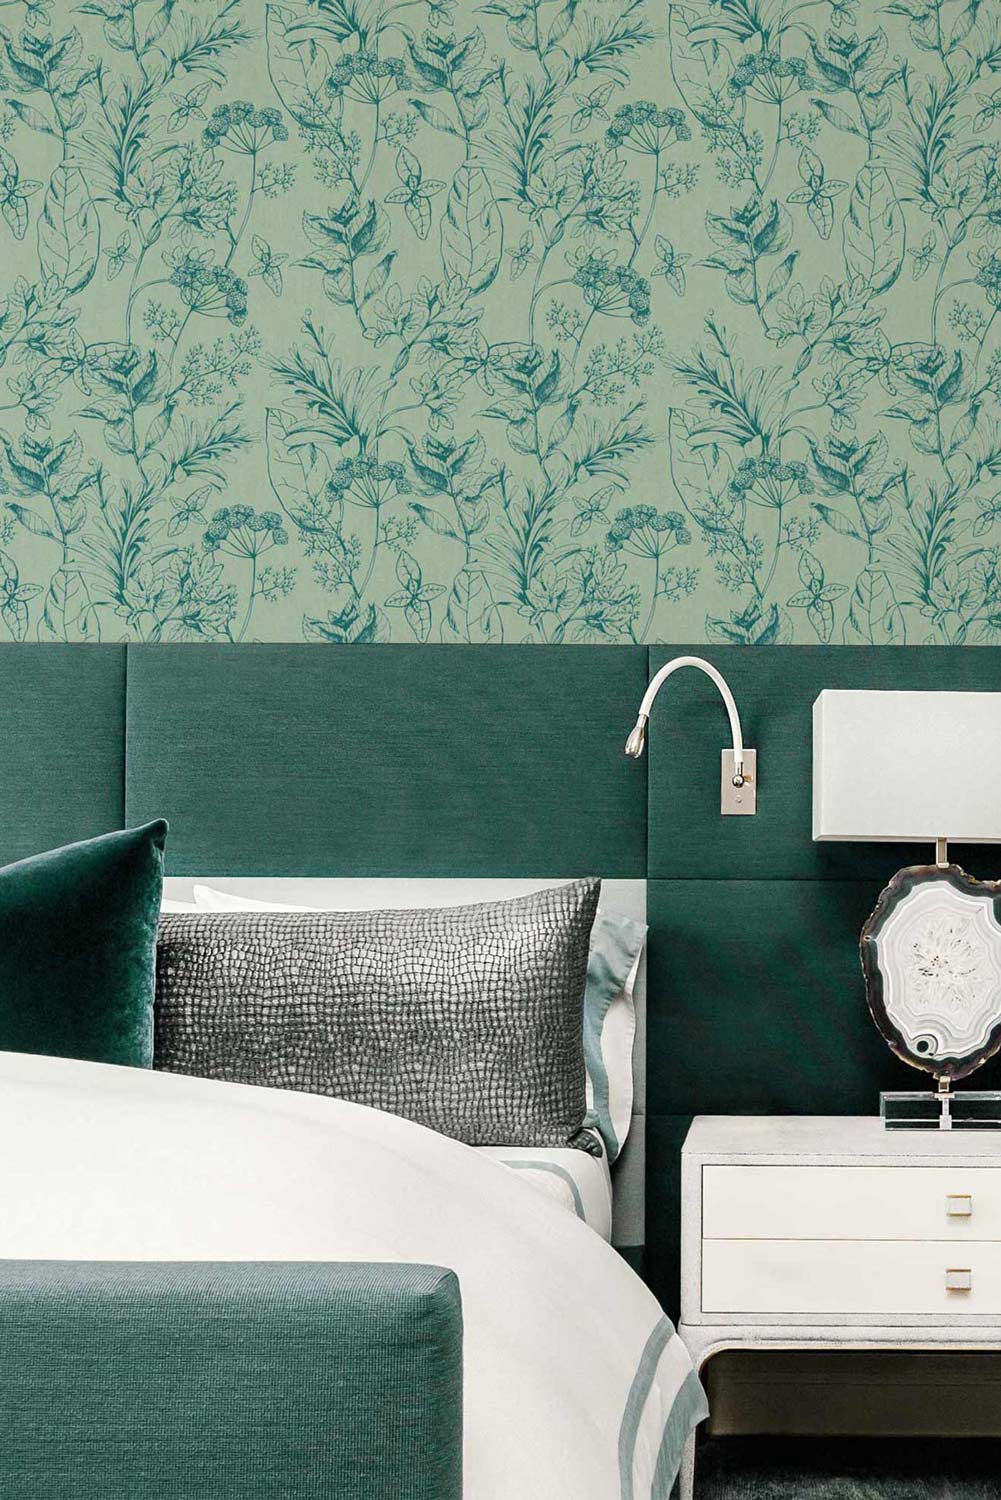 Green Vintage Botanical Bedroom Wallpaper Accent Wall